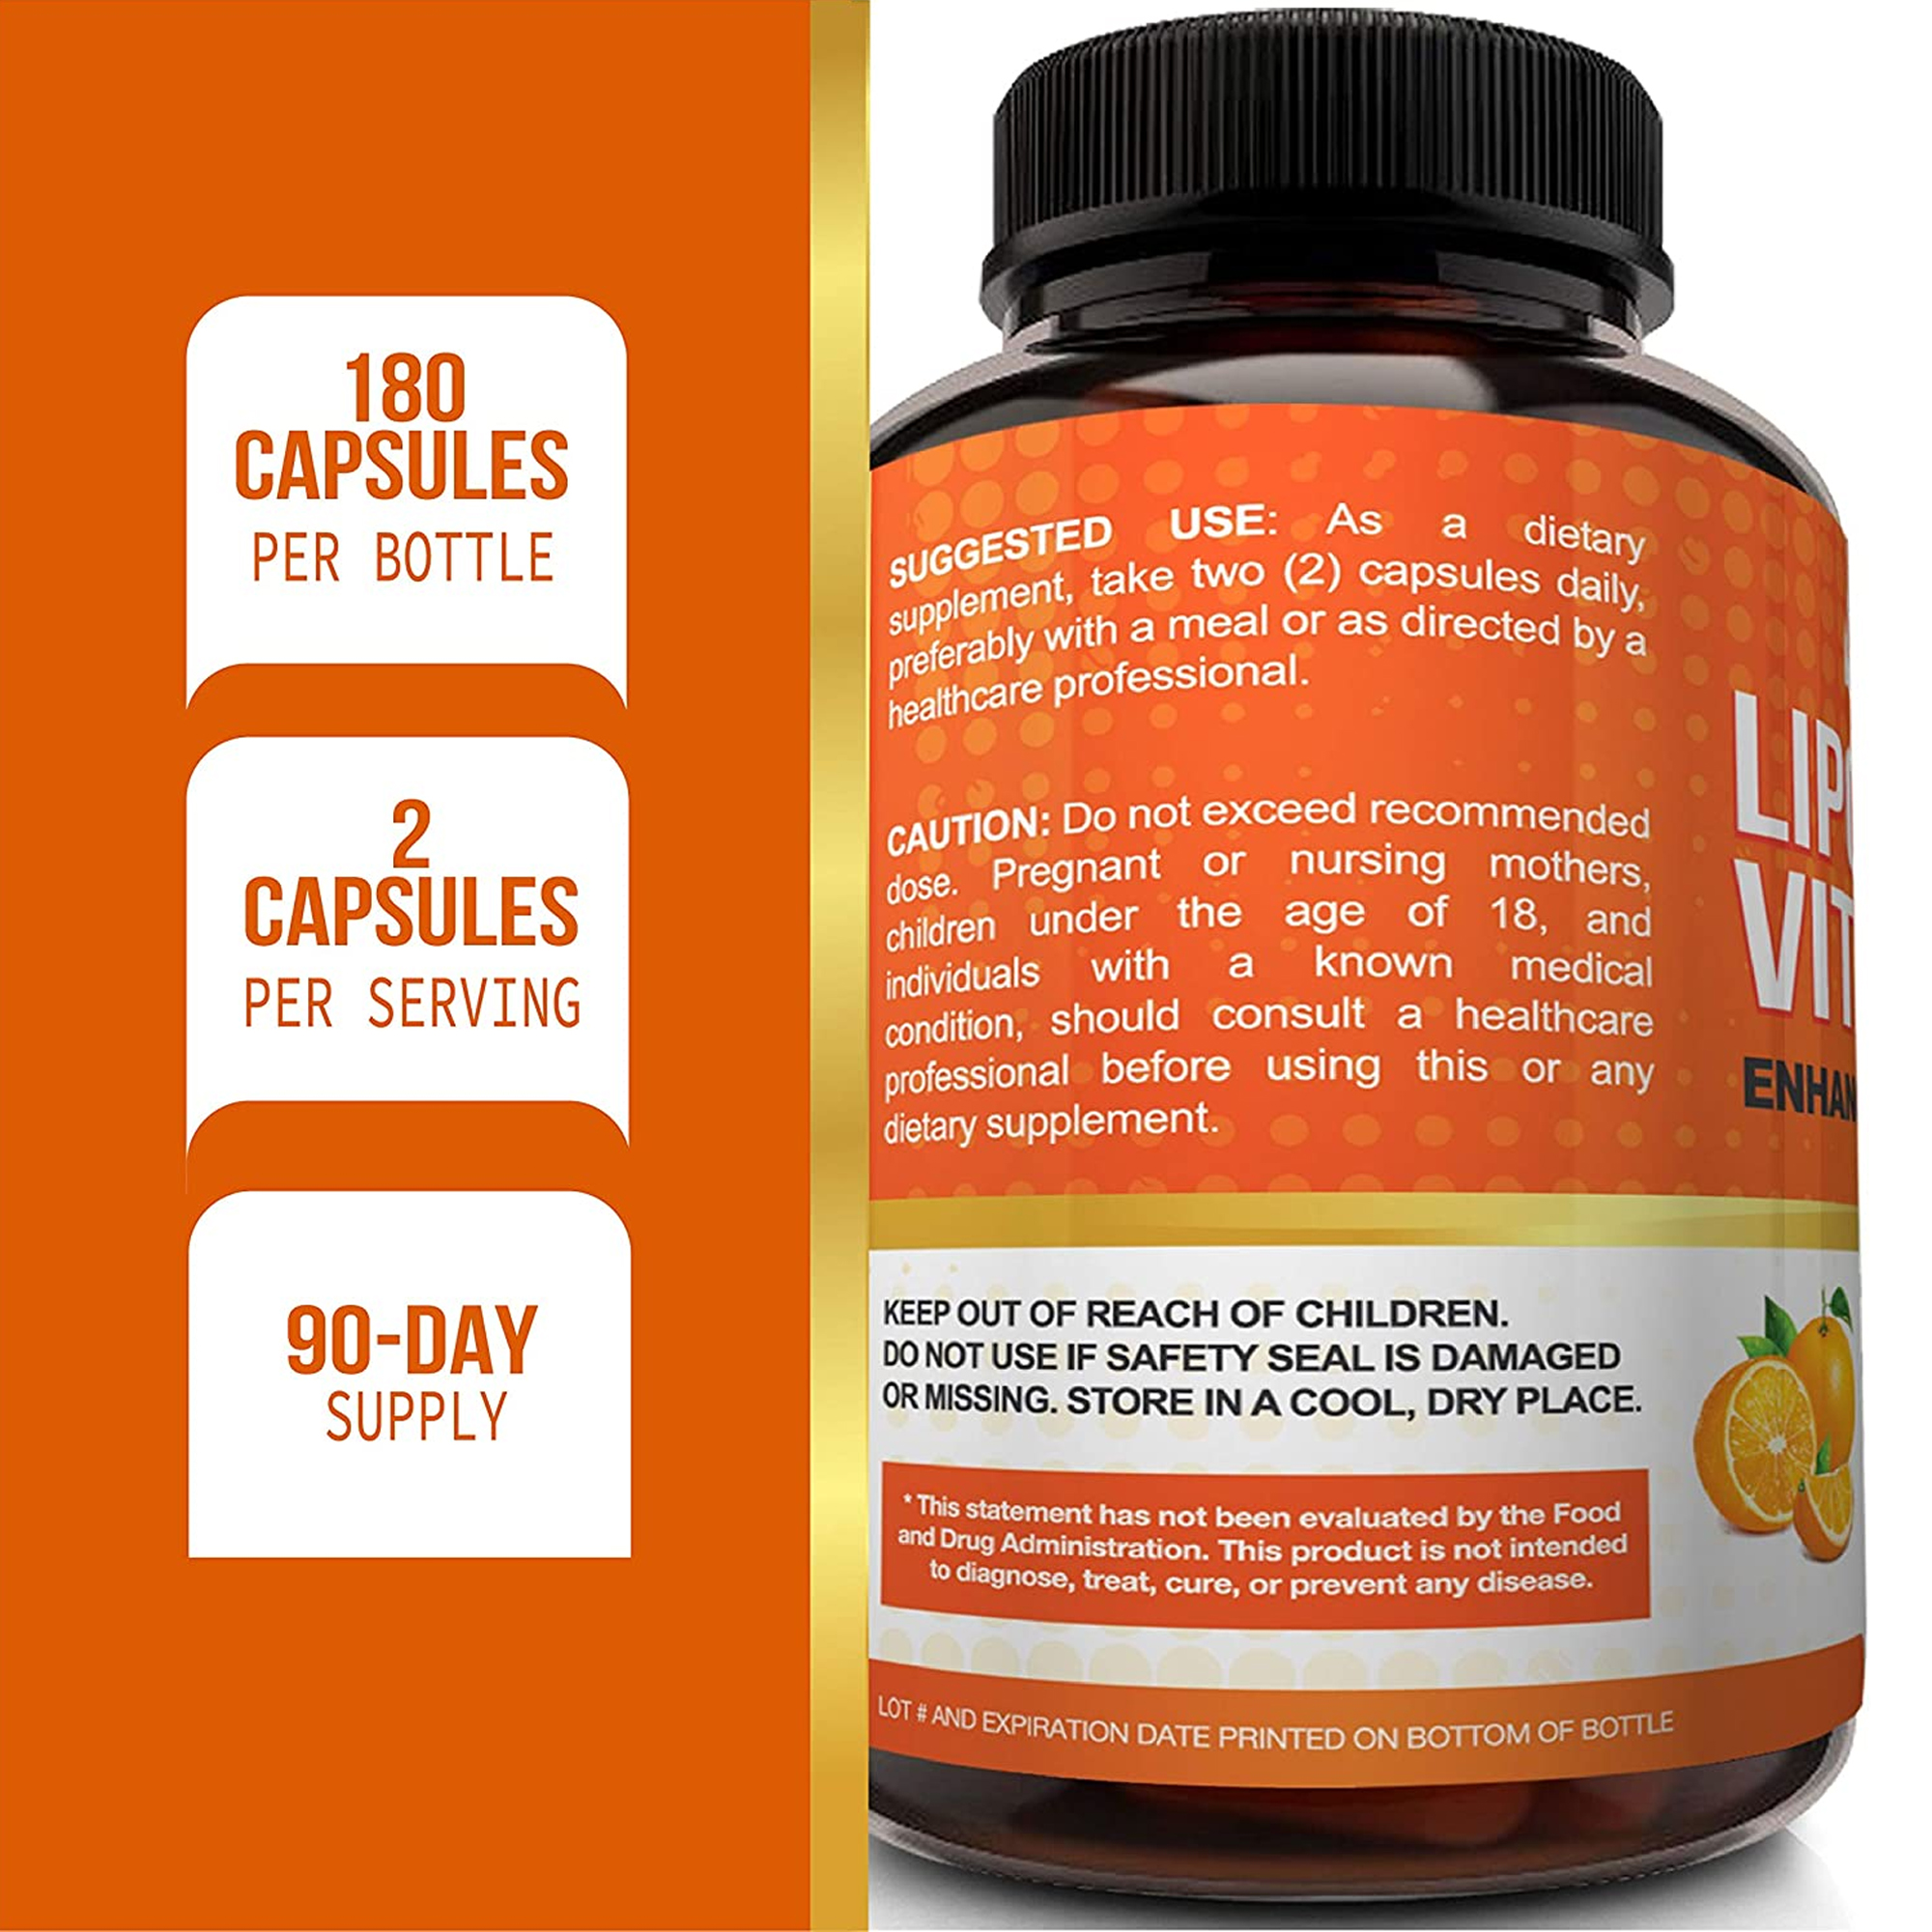 NutriFlair Liposomal Vitamin C 1600mg, 180 Capsules - High Absorption, Fat Soluble VIT C, Antioxidant Supplement, Higher Bioavailability Immune System Support & Collagen Booster, Non-GMO, Vegan Pills - image 3 of 7